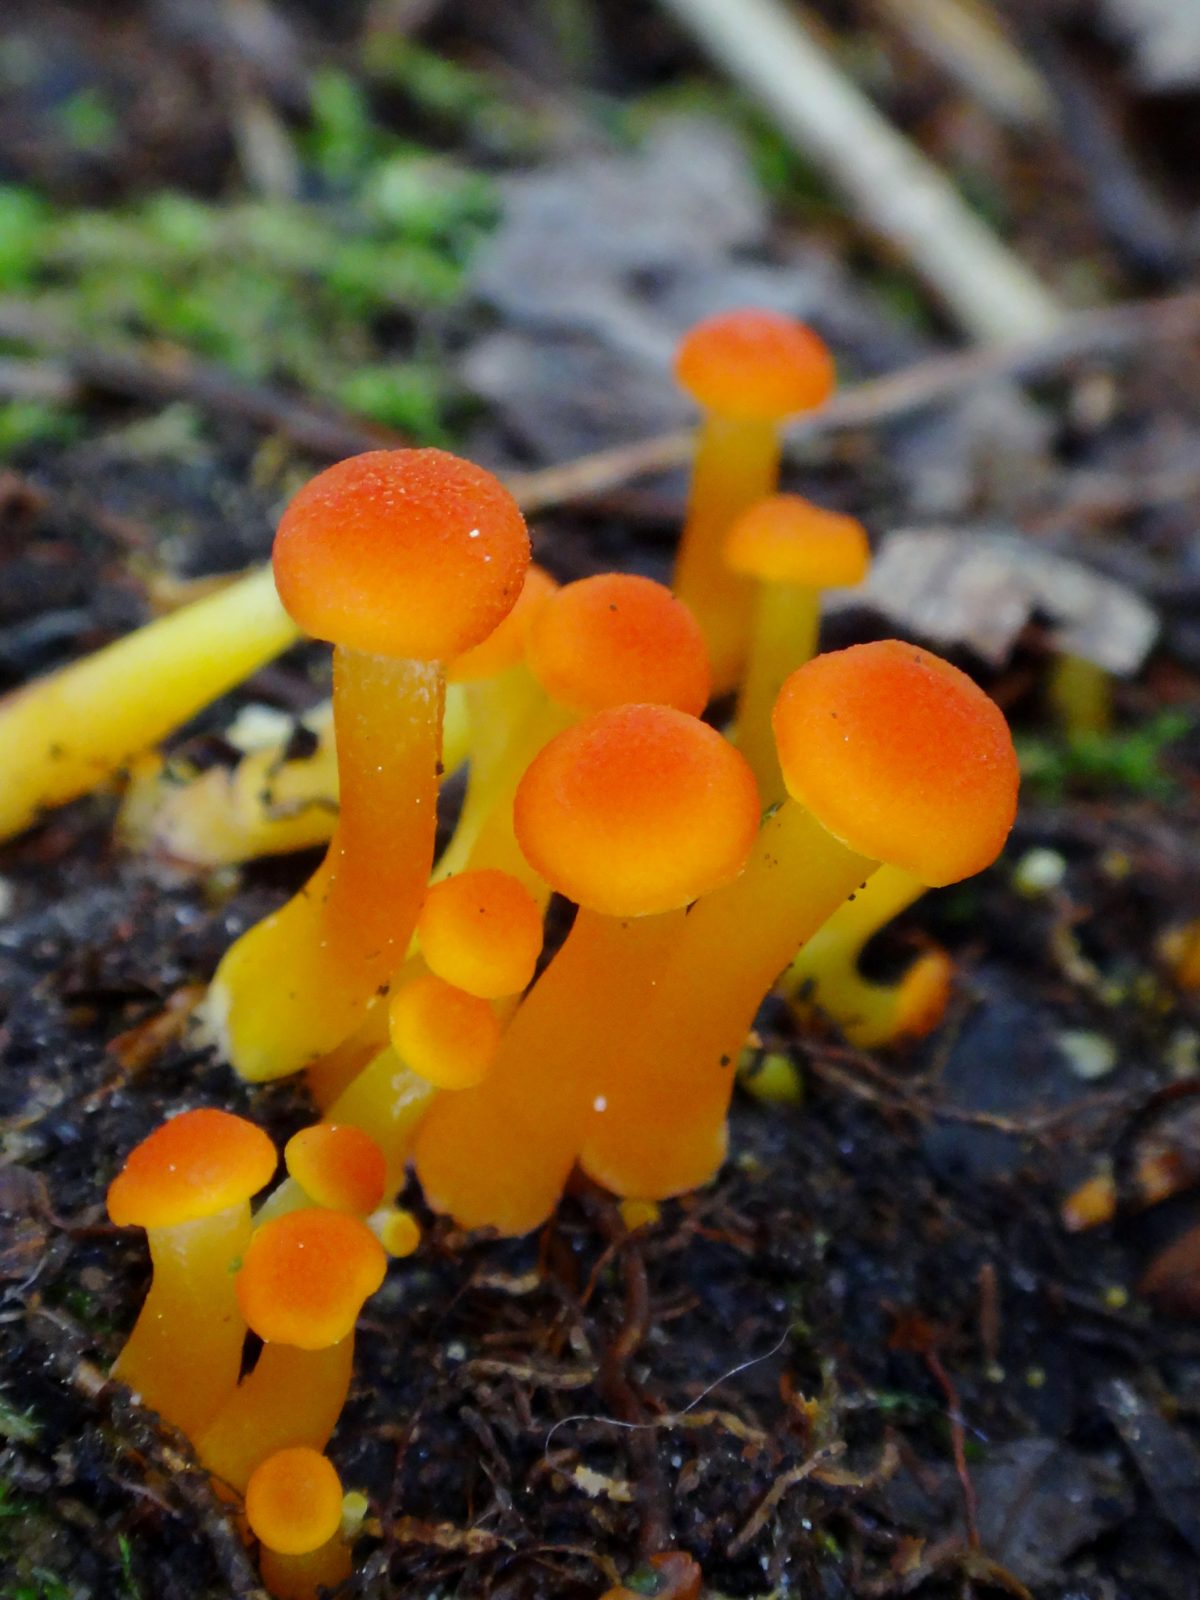 A cluster of small, bright orange mushrooms called Hygrocybe cantharellus, grows from the forest floor: Waxcap.